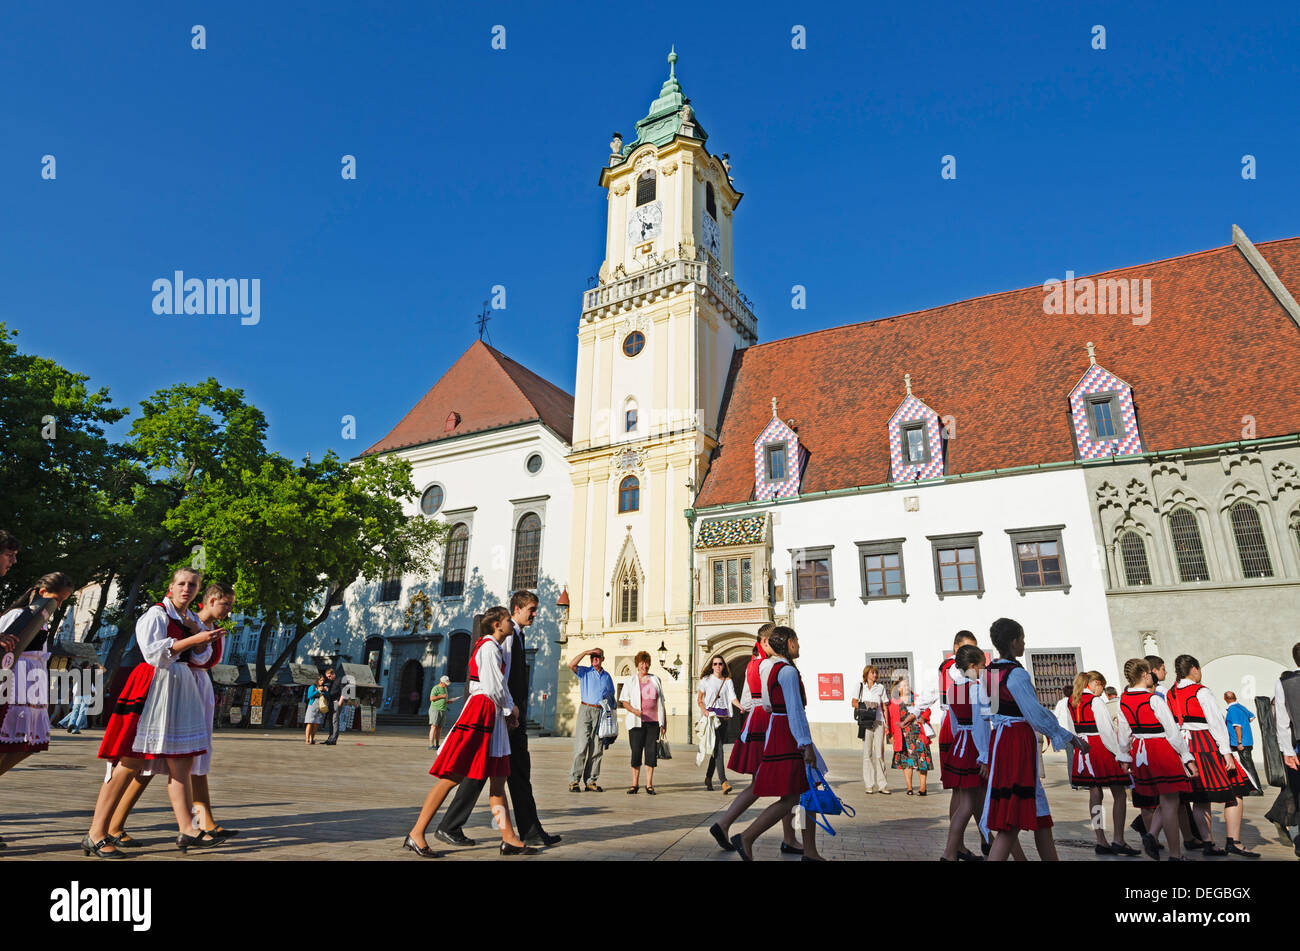 Children in traditional costume in the main square, Old Town Hall Municipal Museum dating from 1421, Bratislava, Slovakia Stock Photo